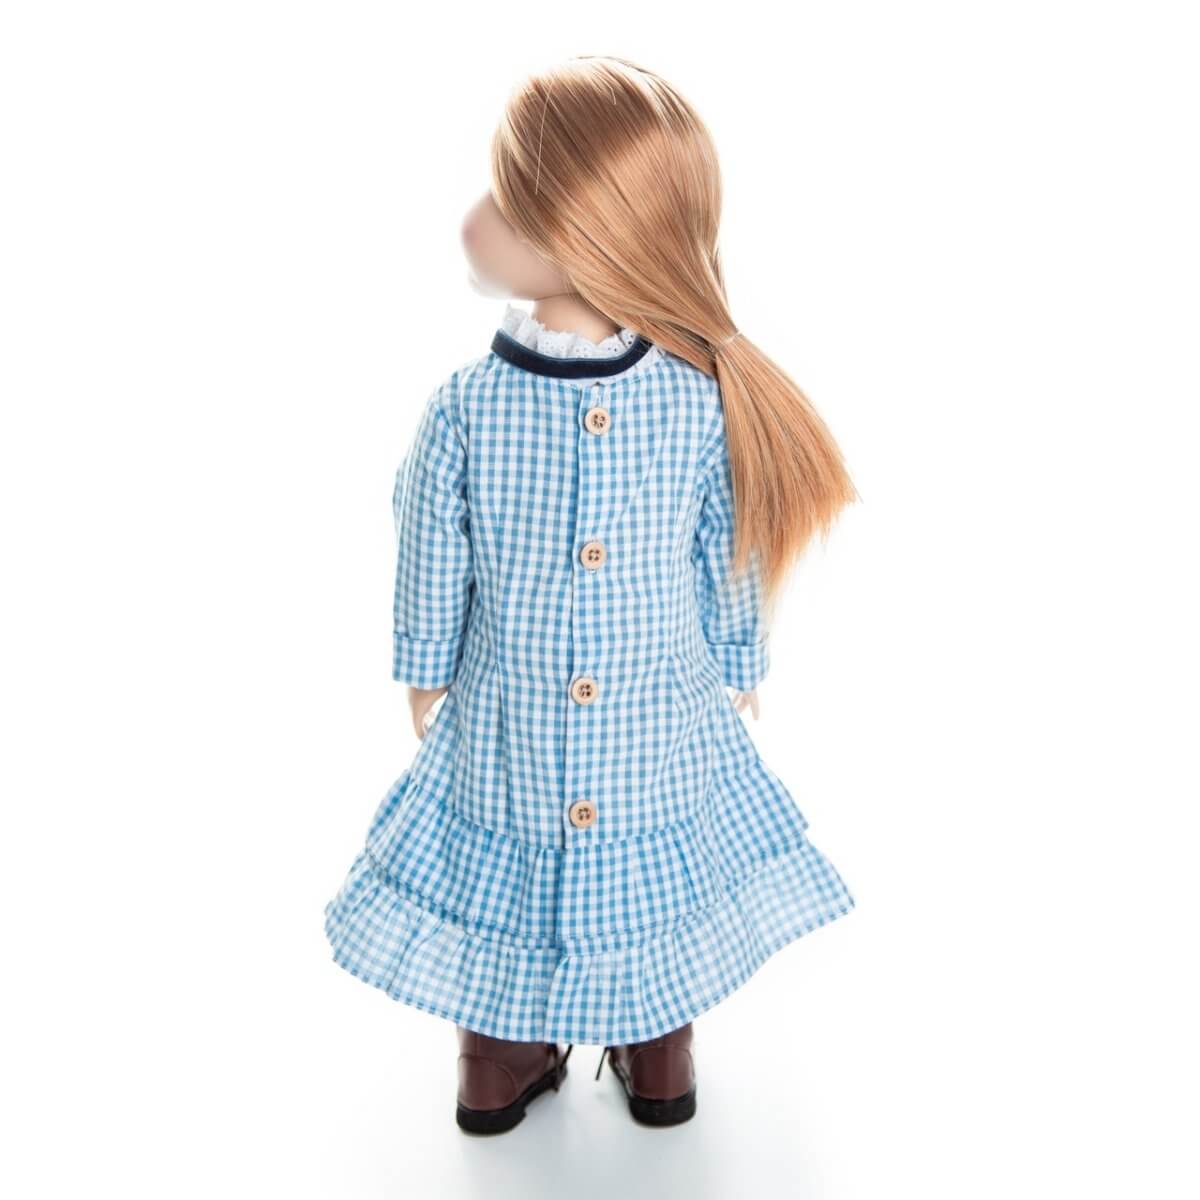 Little House On The Prairie Blue Check Dress, Clothes for 18 Inch Dolls - Simon's Collectibles